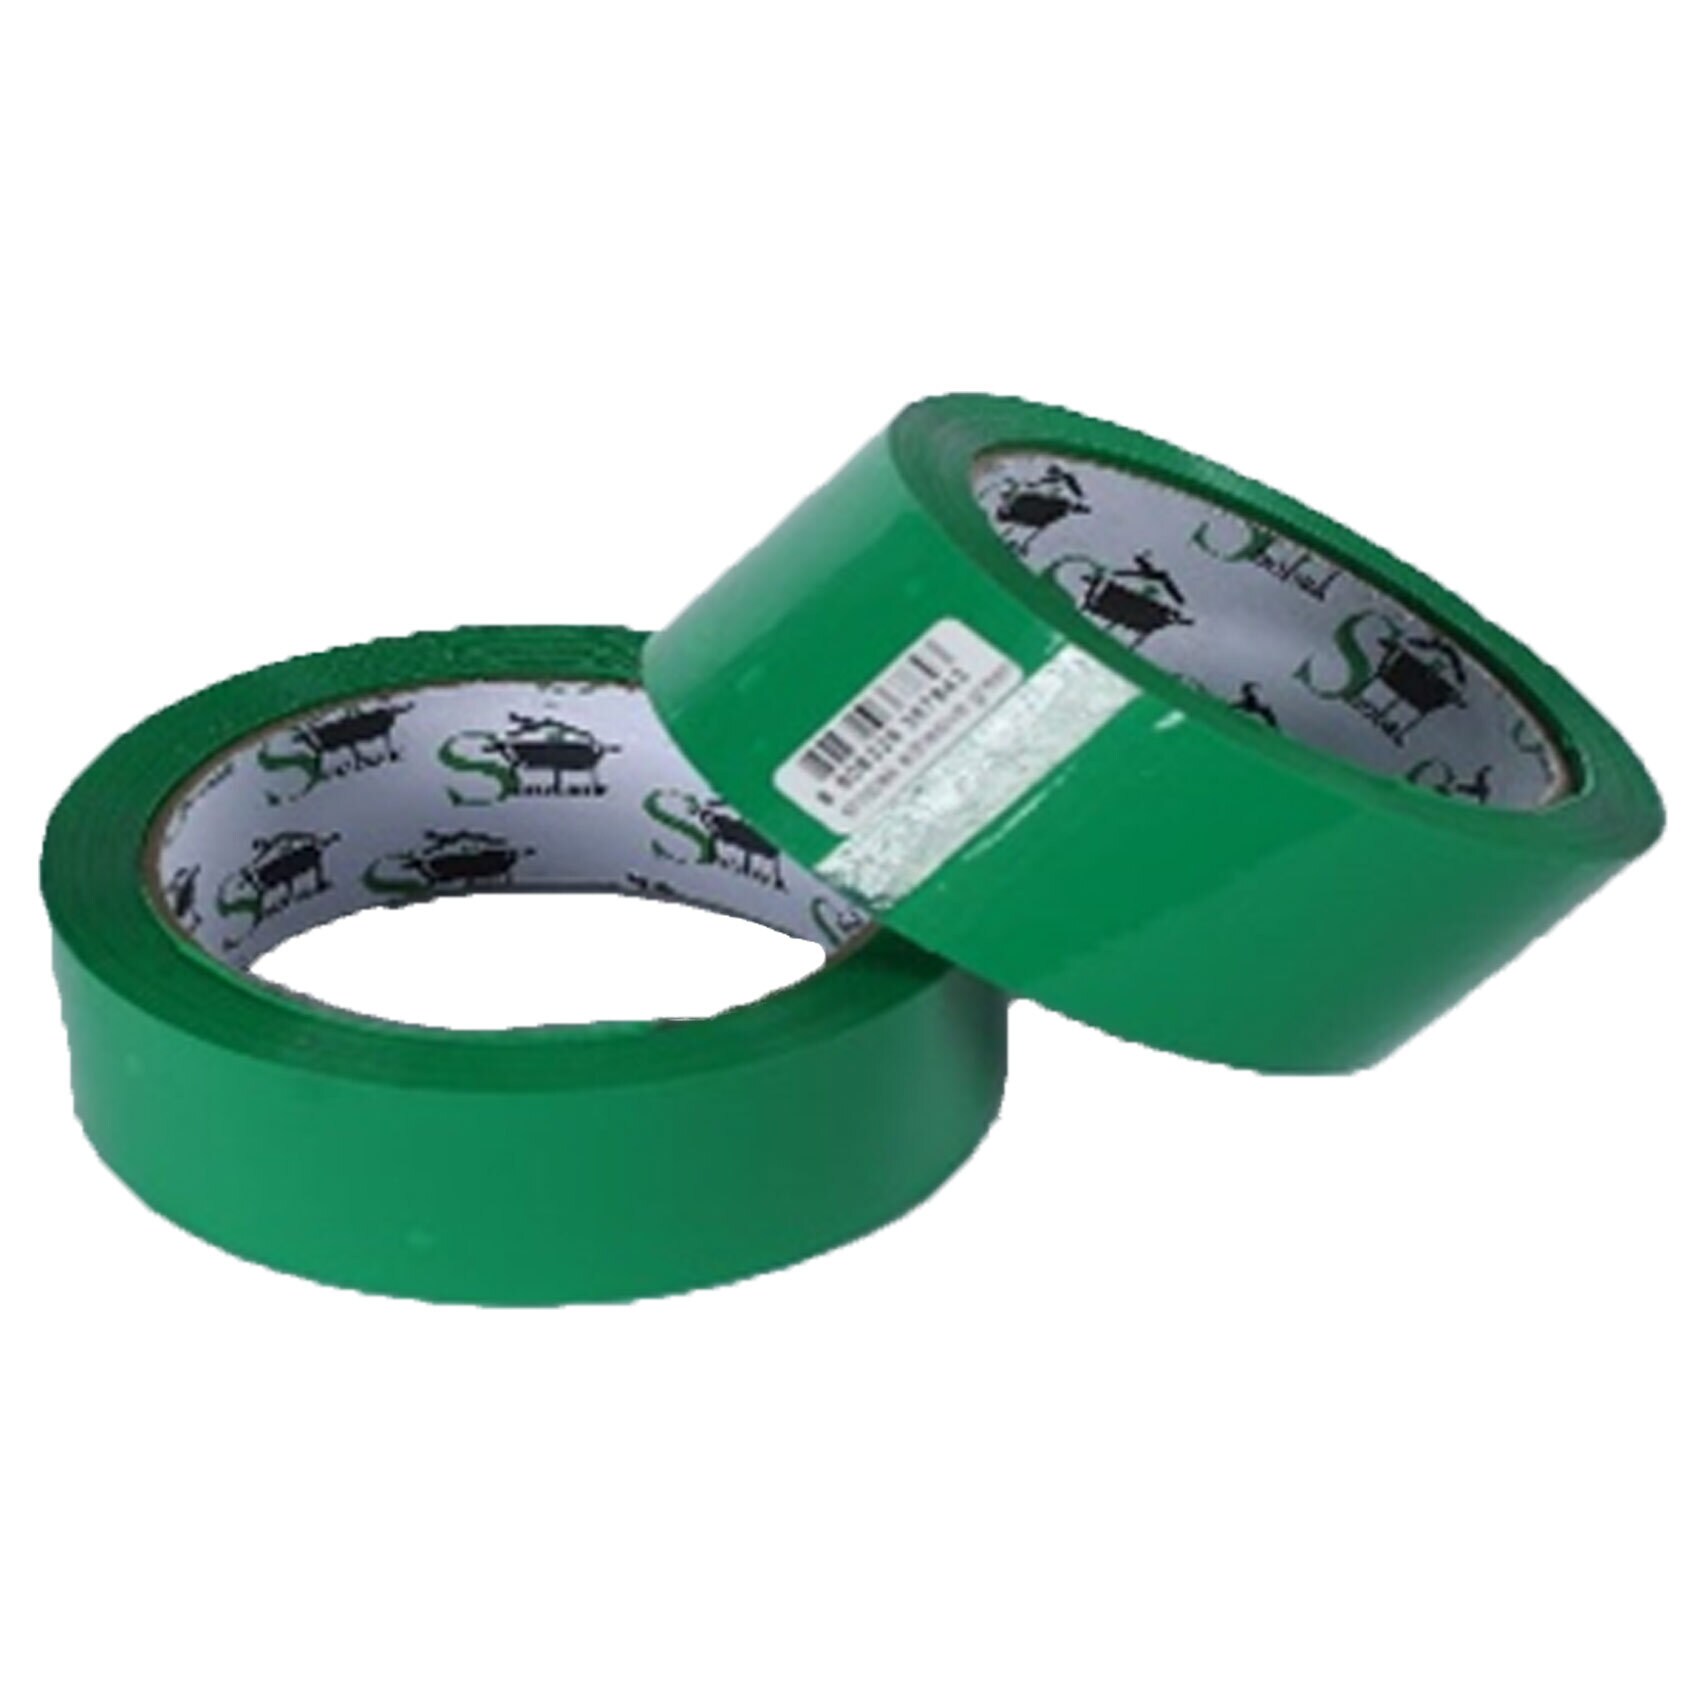 Duck Black Duct Tape - Shop Adhesives & Tape at H-E-B